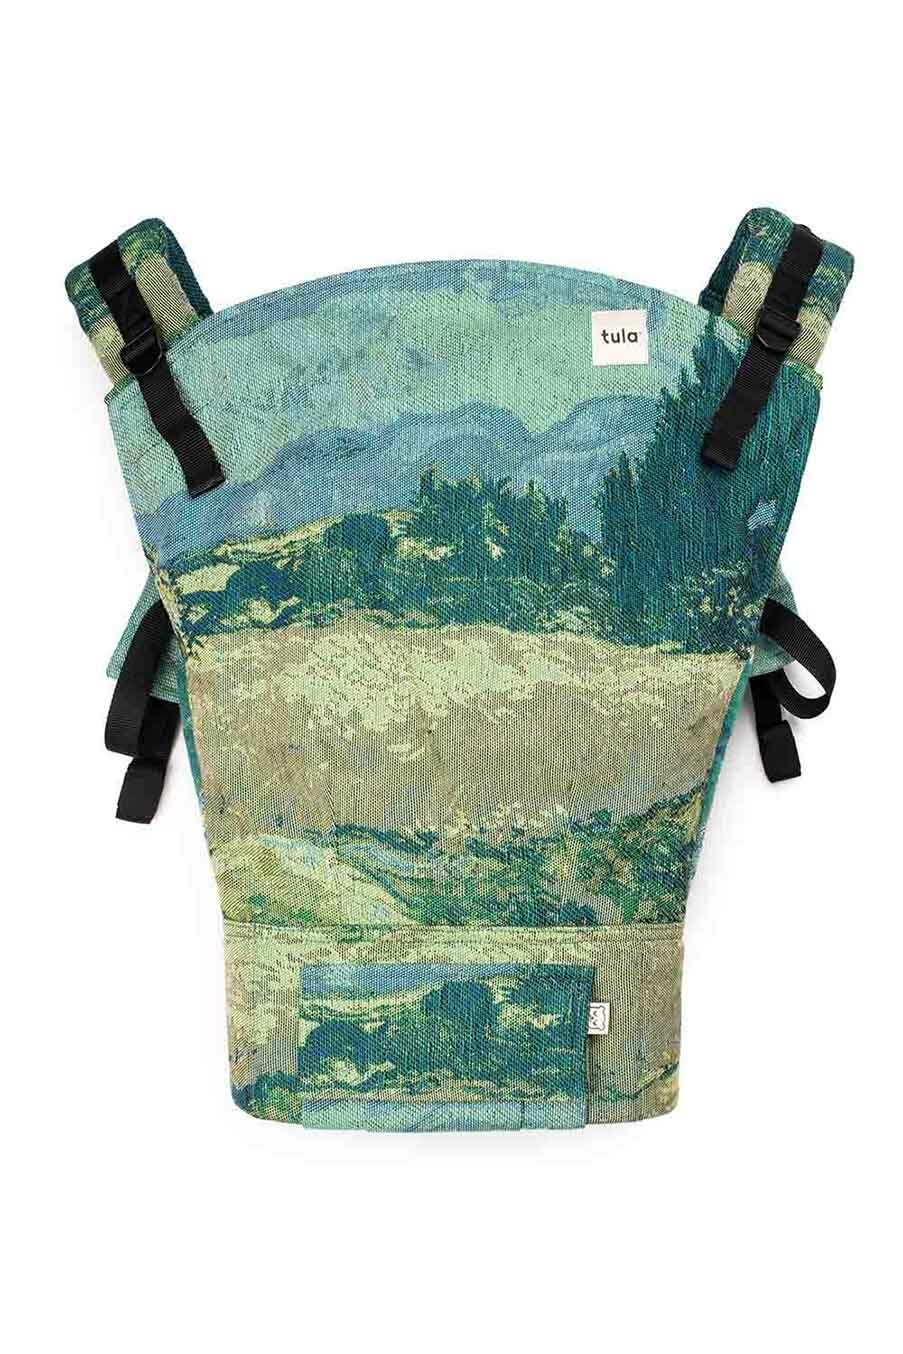 Cypresses - Signature Woven Toddler Carrier